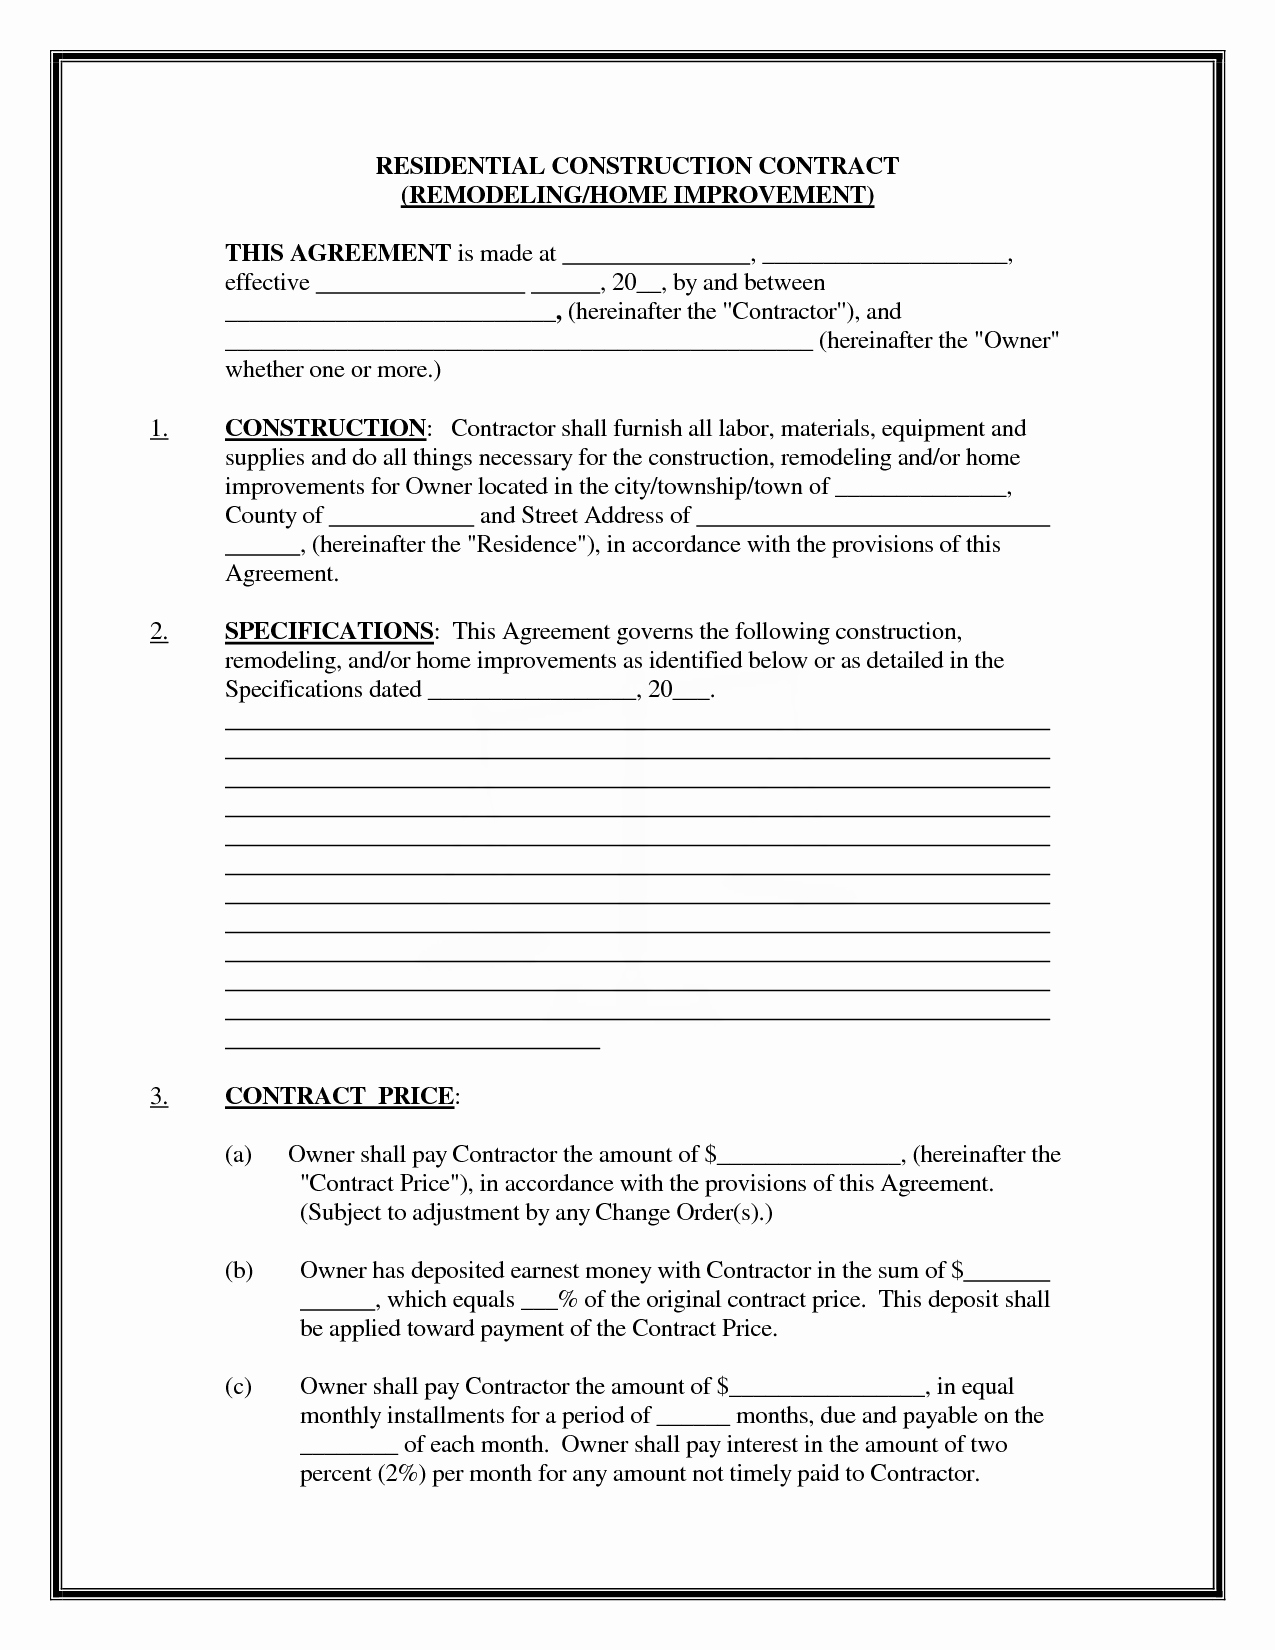 Home Improvement Contract Template Awesome Pics Of Residential Construction Contracts